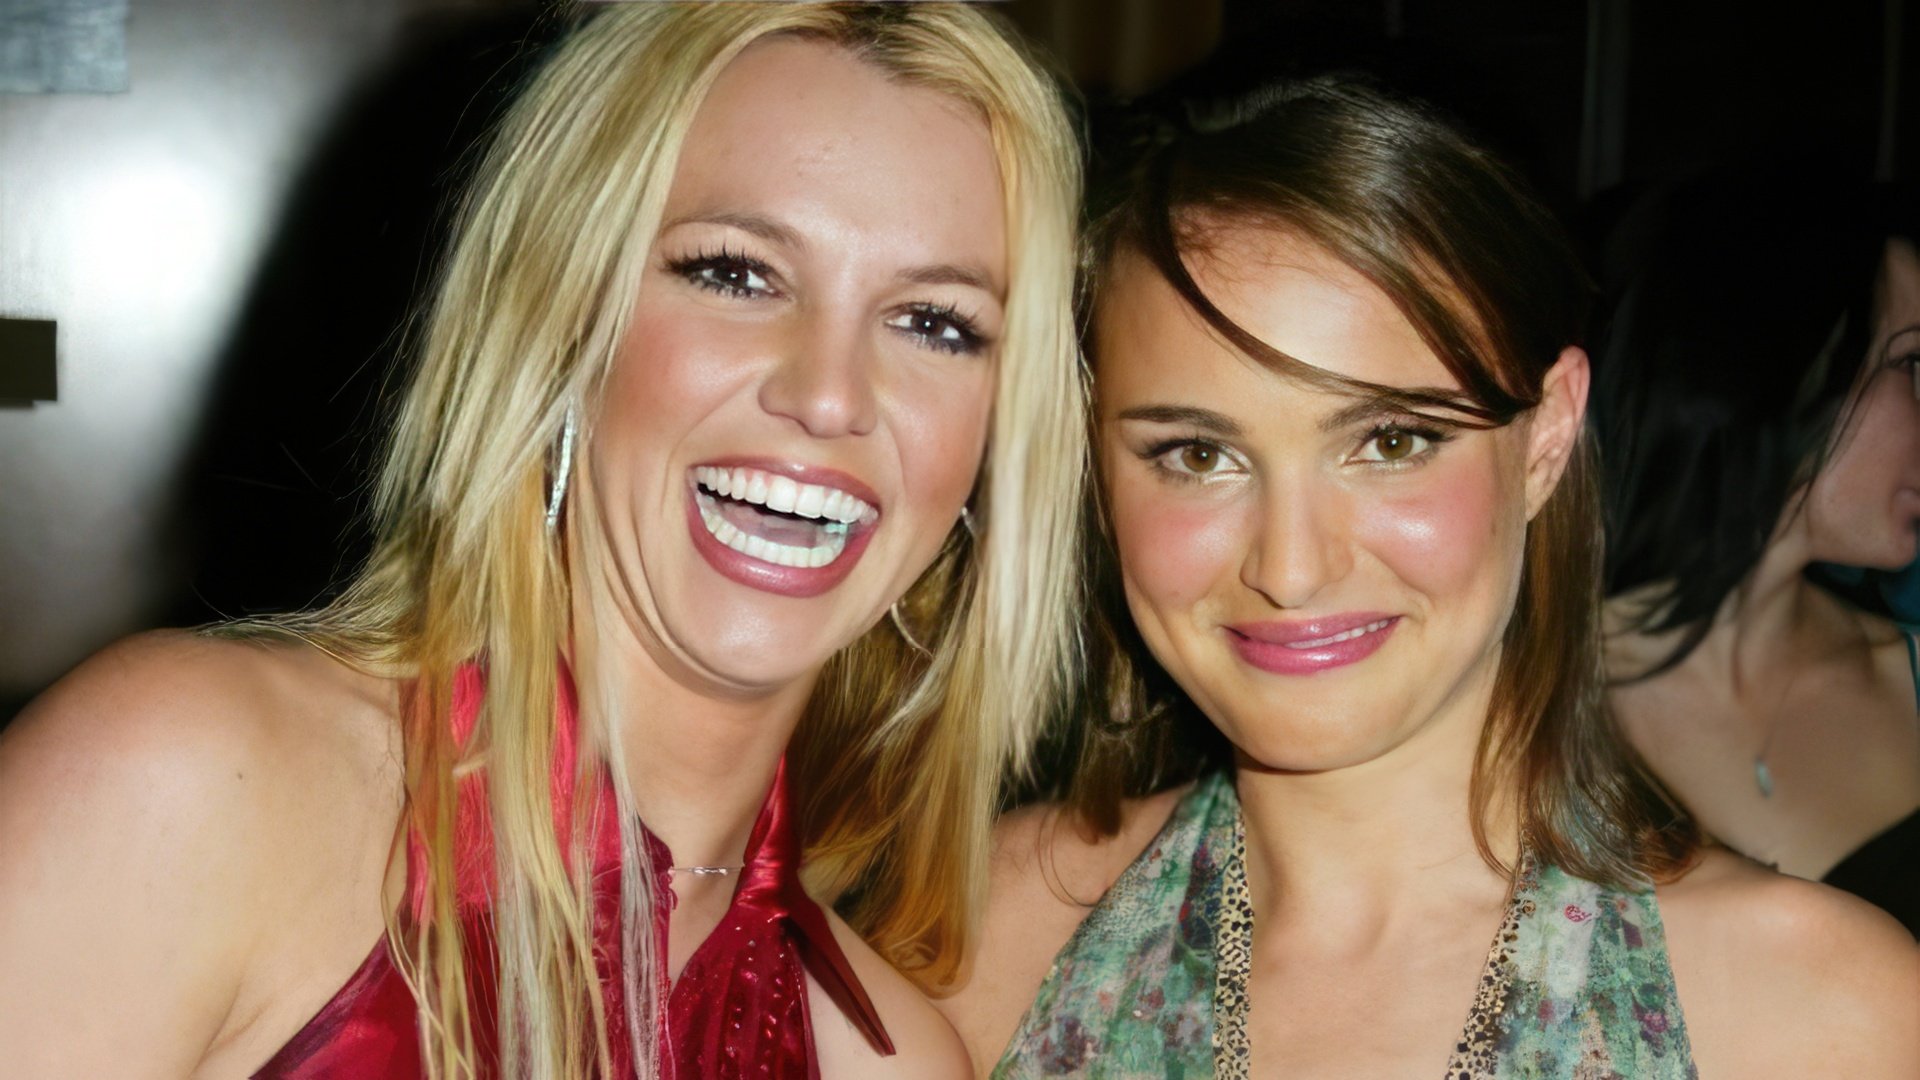 Natalie Portman and Britney Spears are familiar from childhood